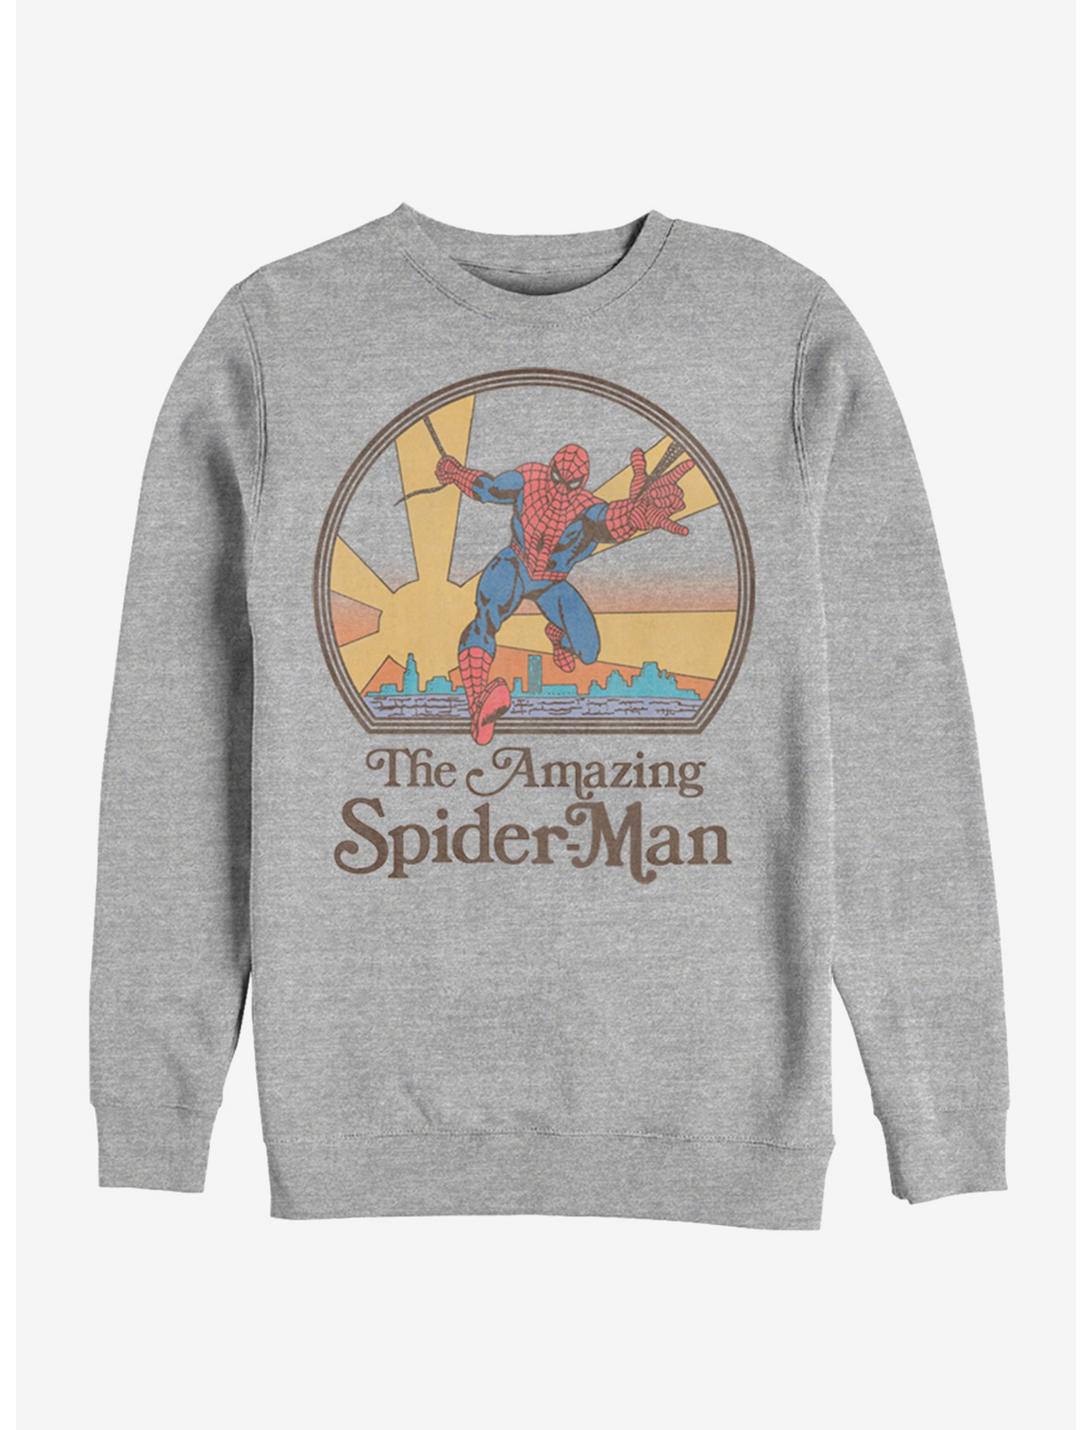 Marvel Comics The Amazing Spider-Man Grey Sweater For Kids Sizes 6,8,10 